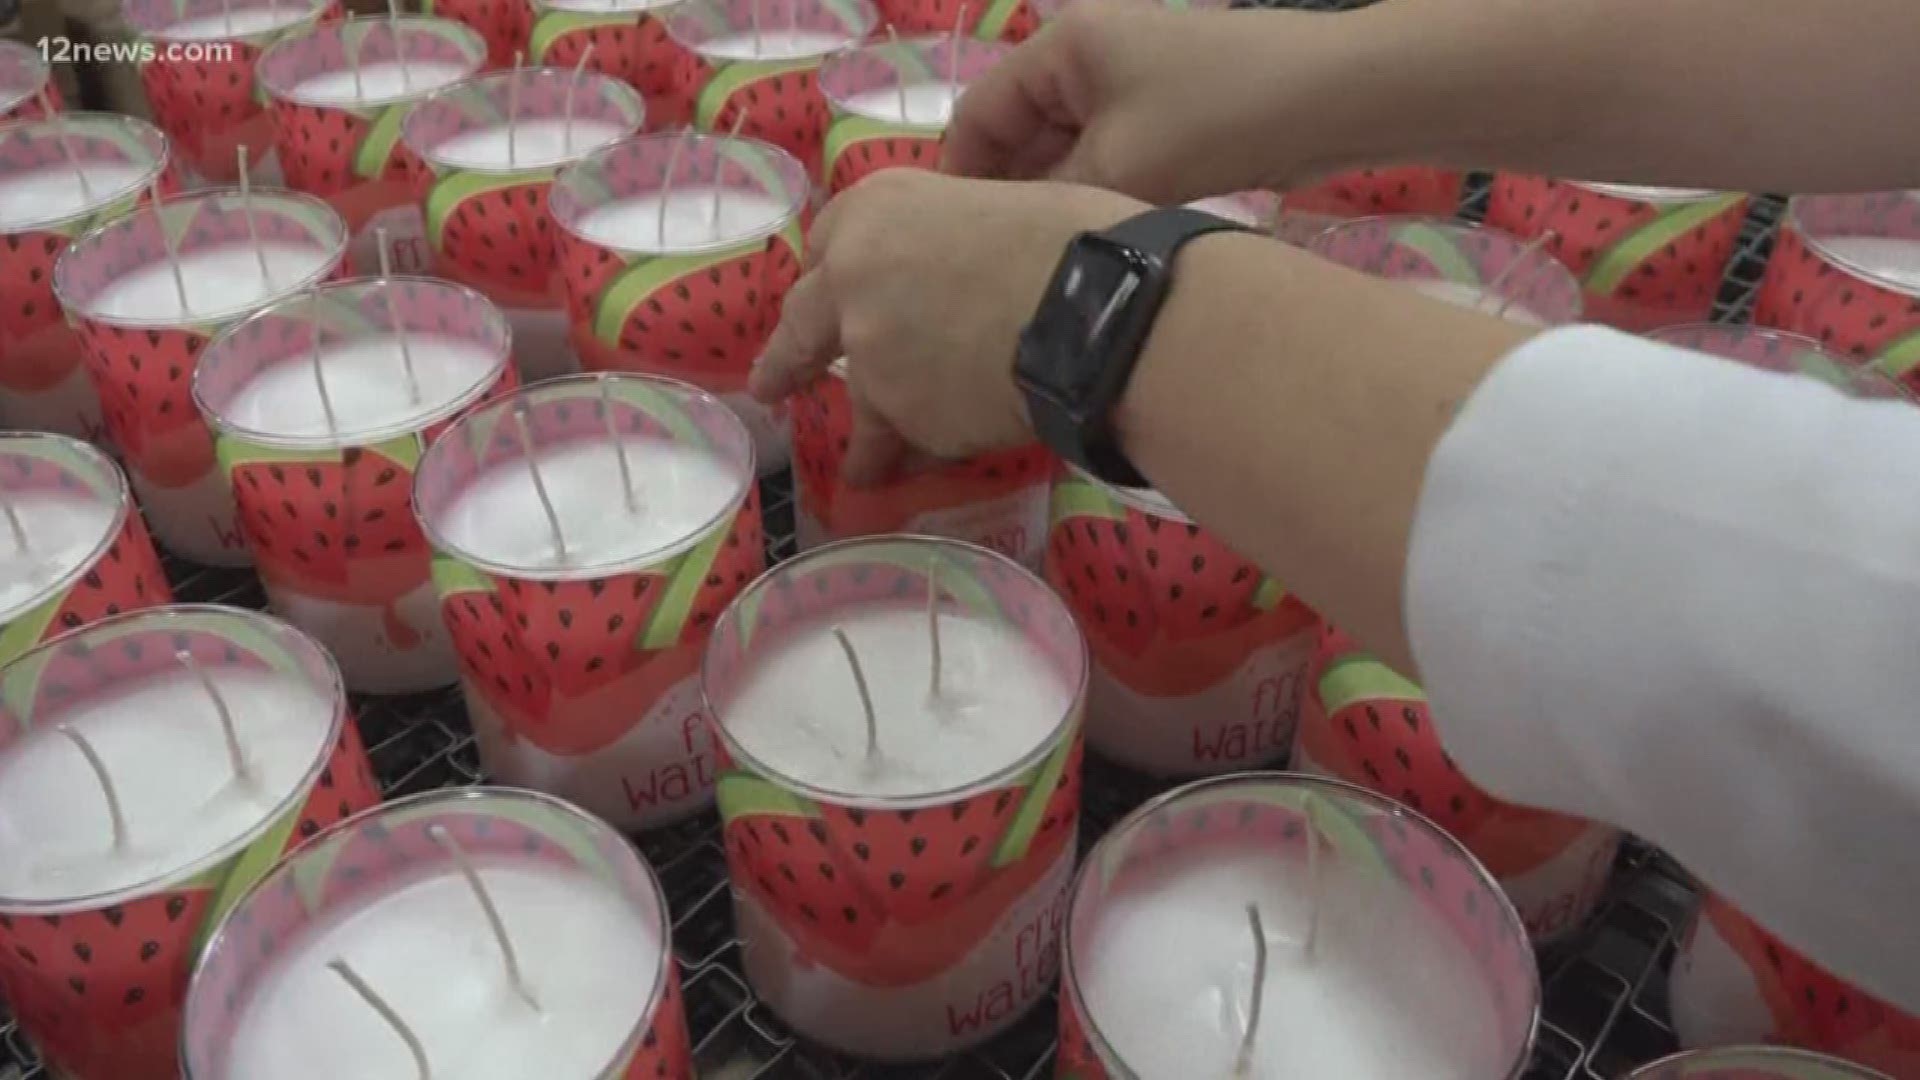 Rachel Cole recently visited Gold Canyon to learn more about how the fragrant-filled candles are created.